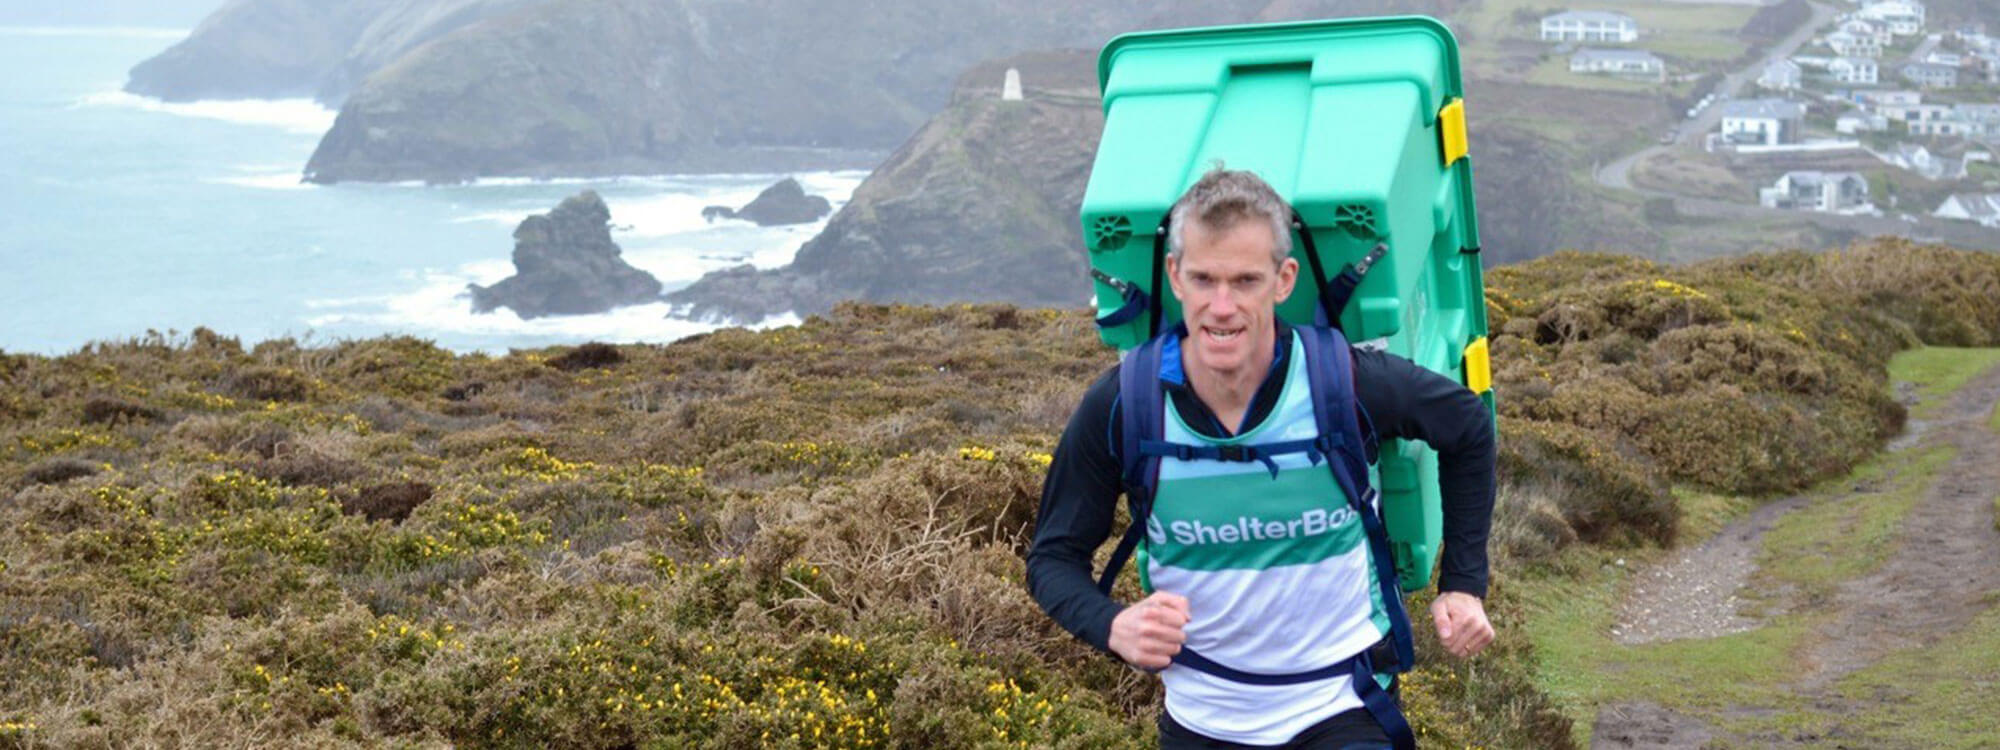 man running for shelterbox charity event